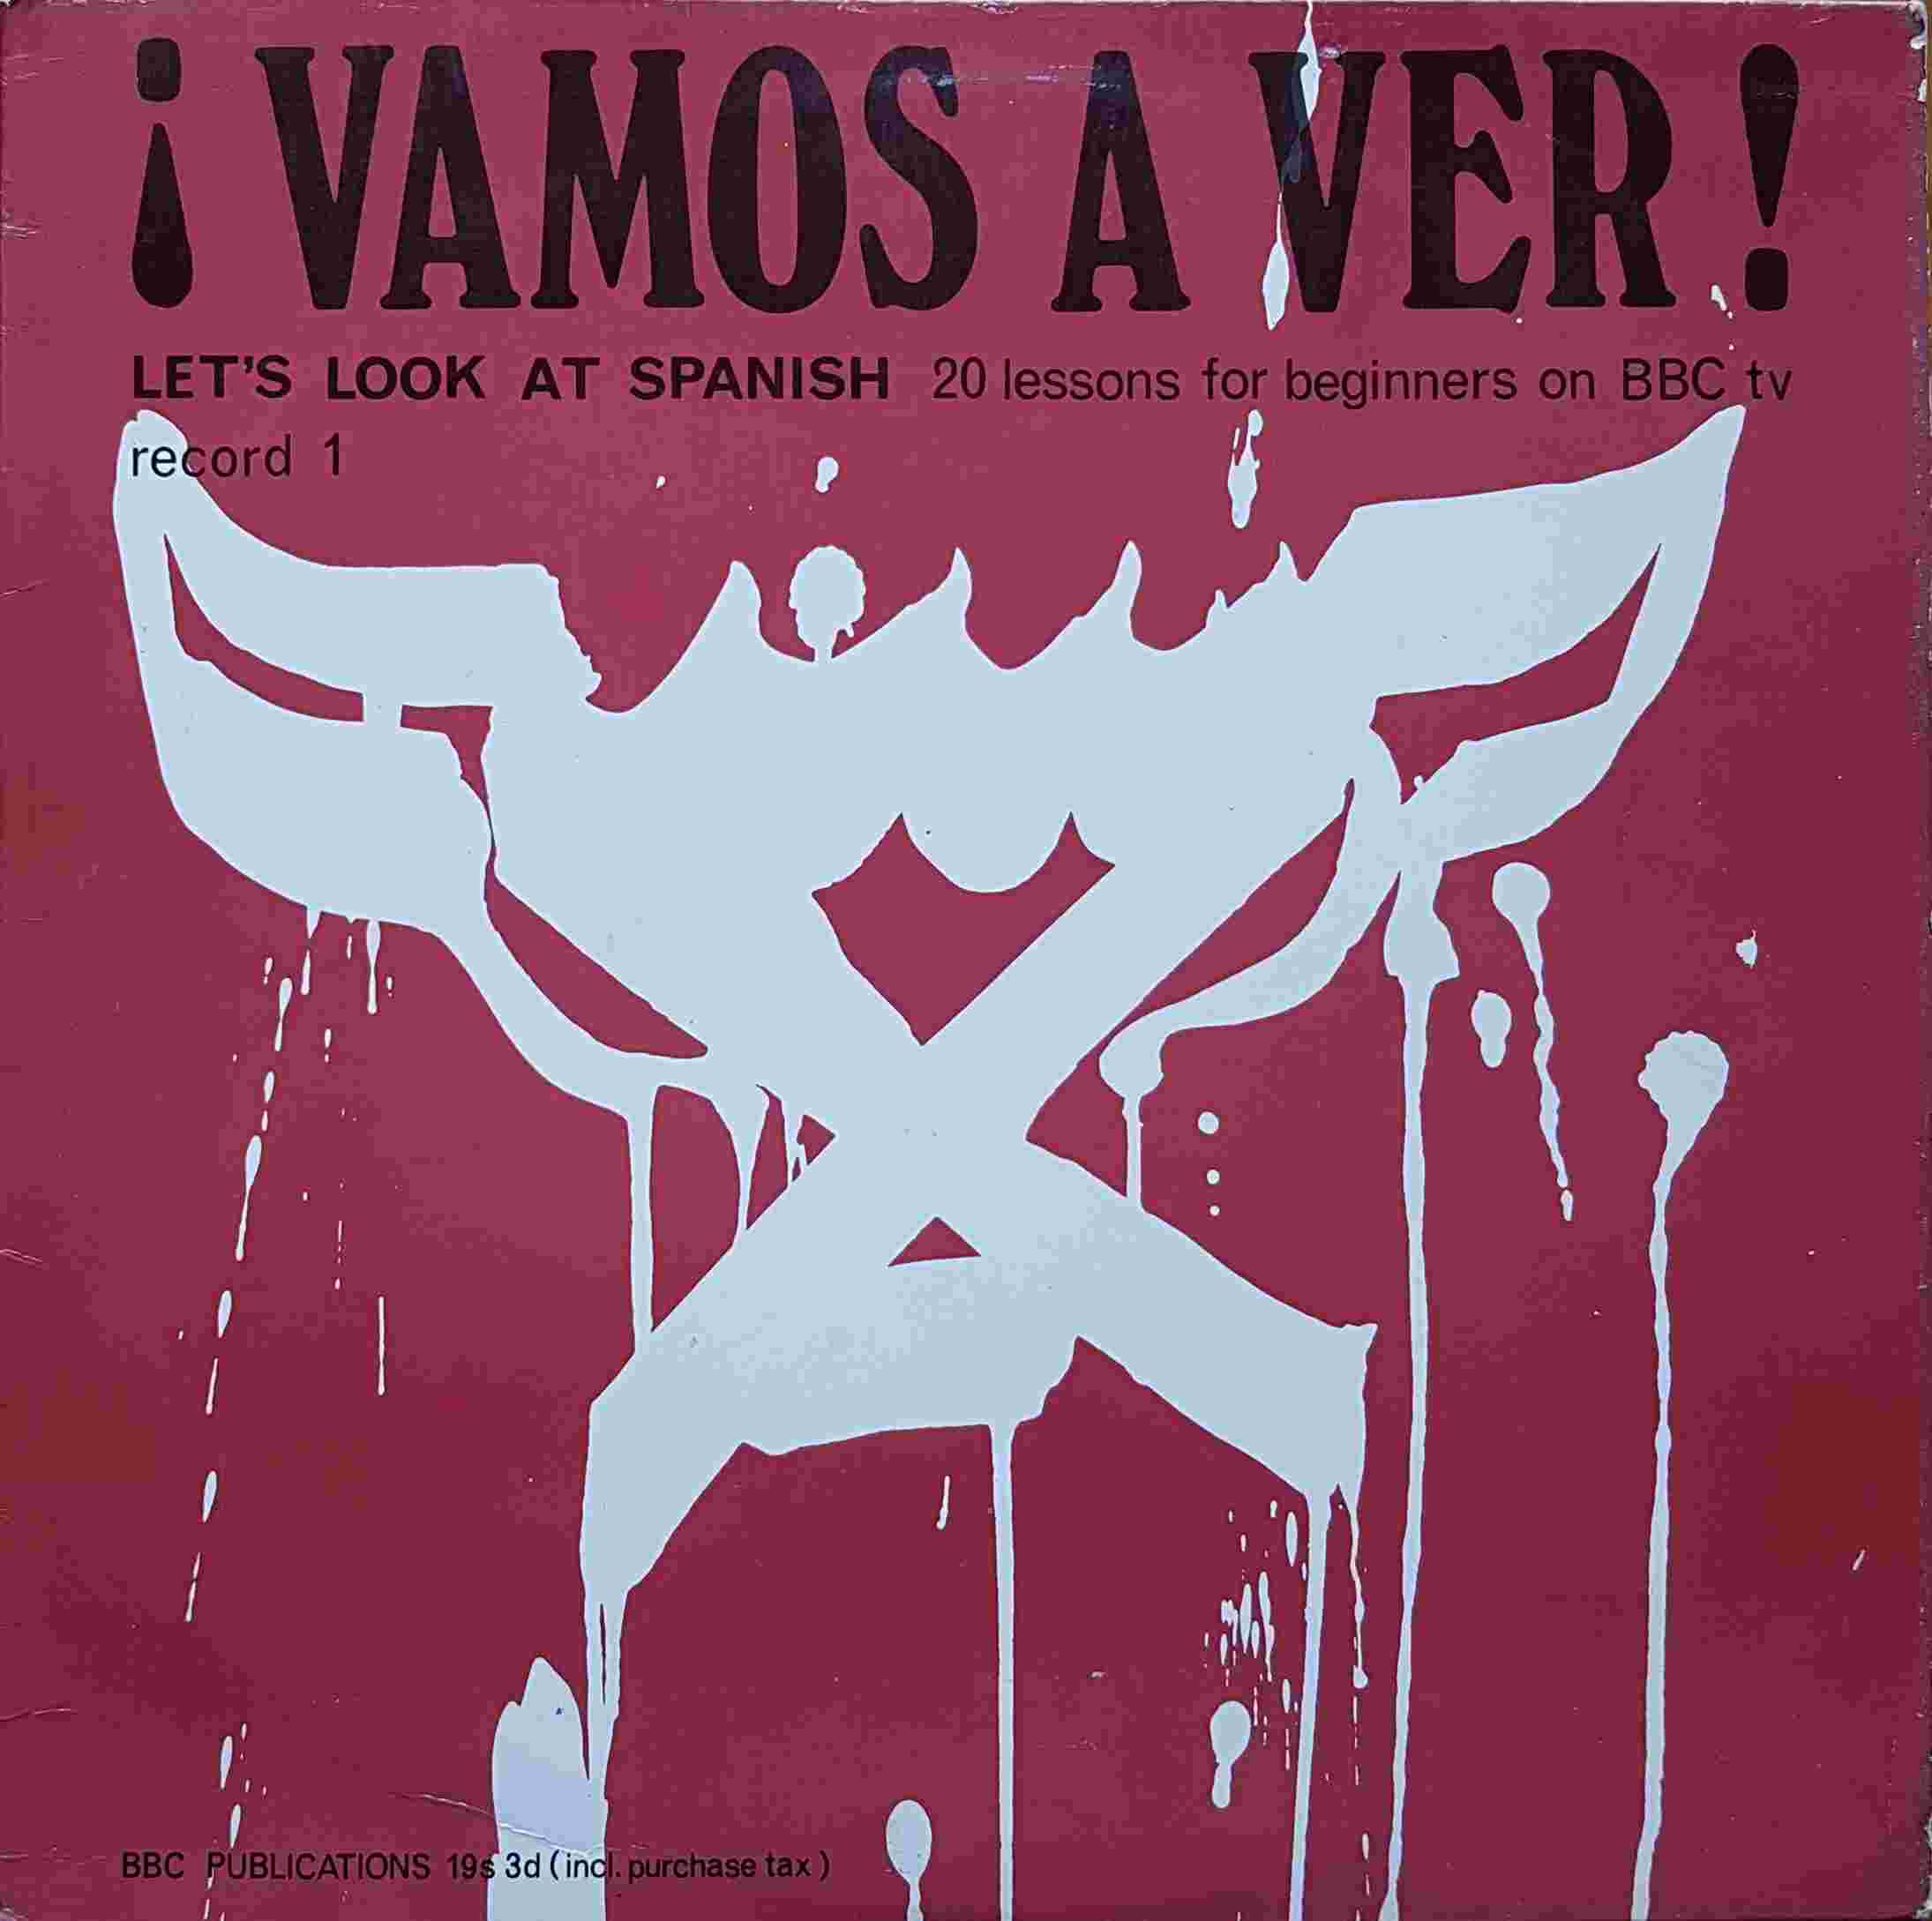 Picture of OP 109/110 Vamos A Ver - Let's look at Spanish on BBC tv - Record 1 by artist Helena Valenti / Brian Dutton / Angel Garcia De Paredes / Joseph Cremona from the BBC albums - Records and Tapes library